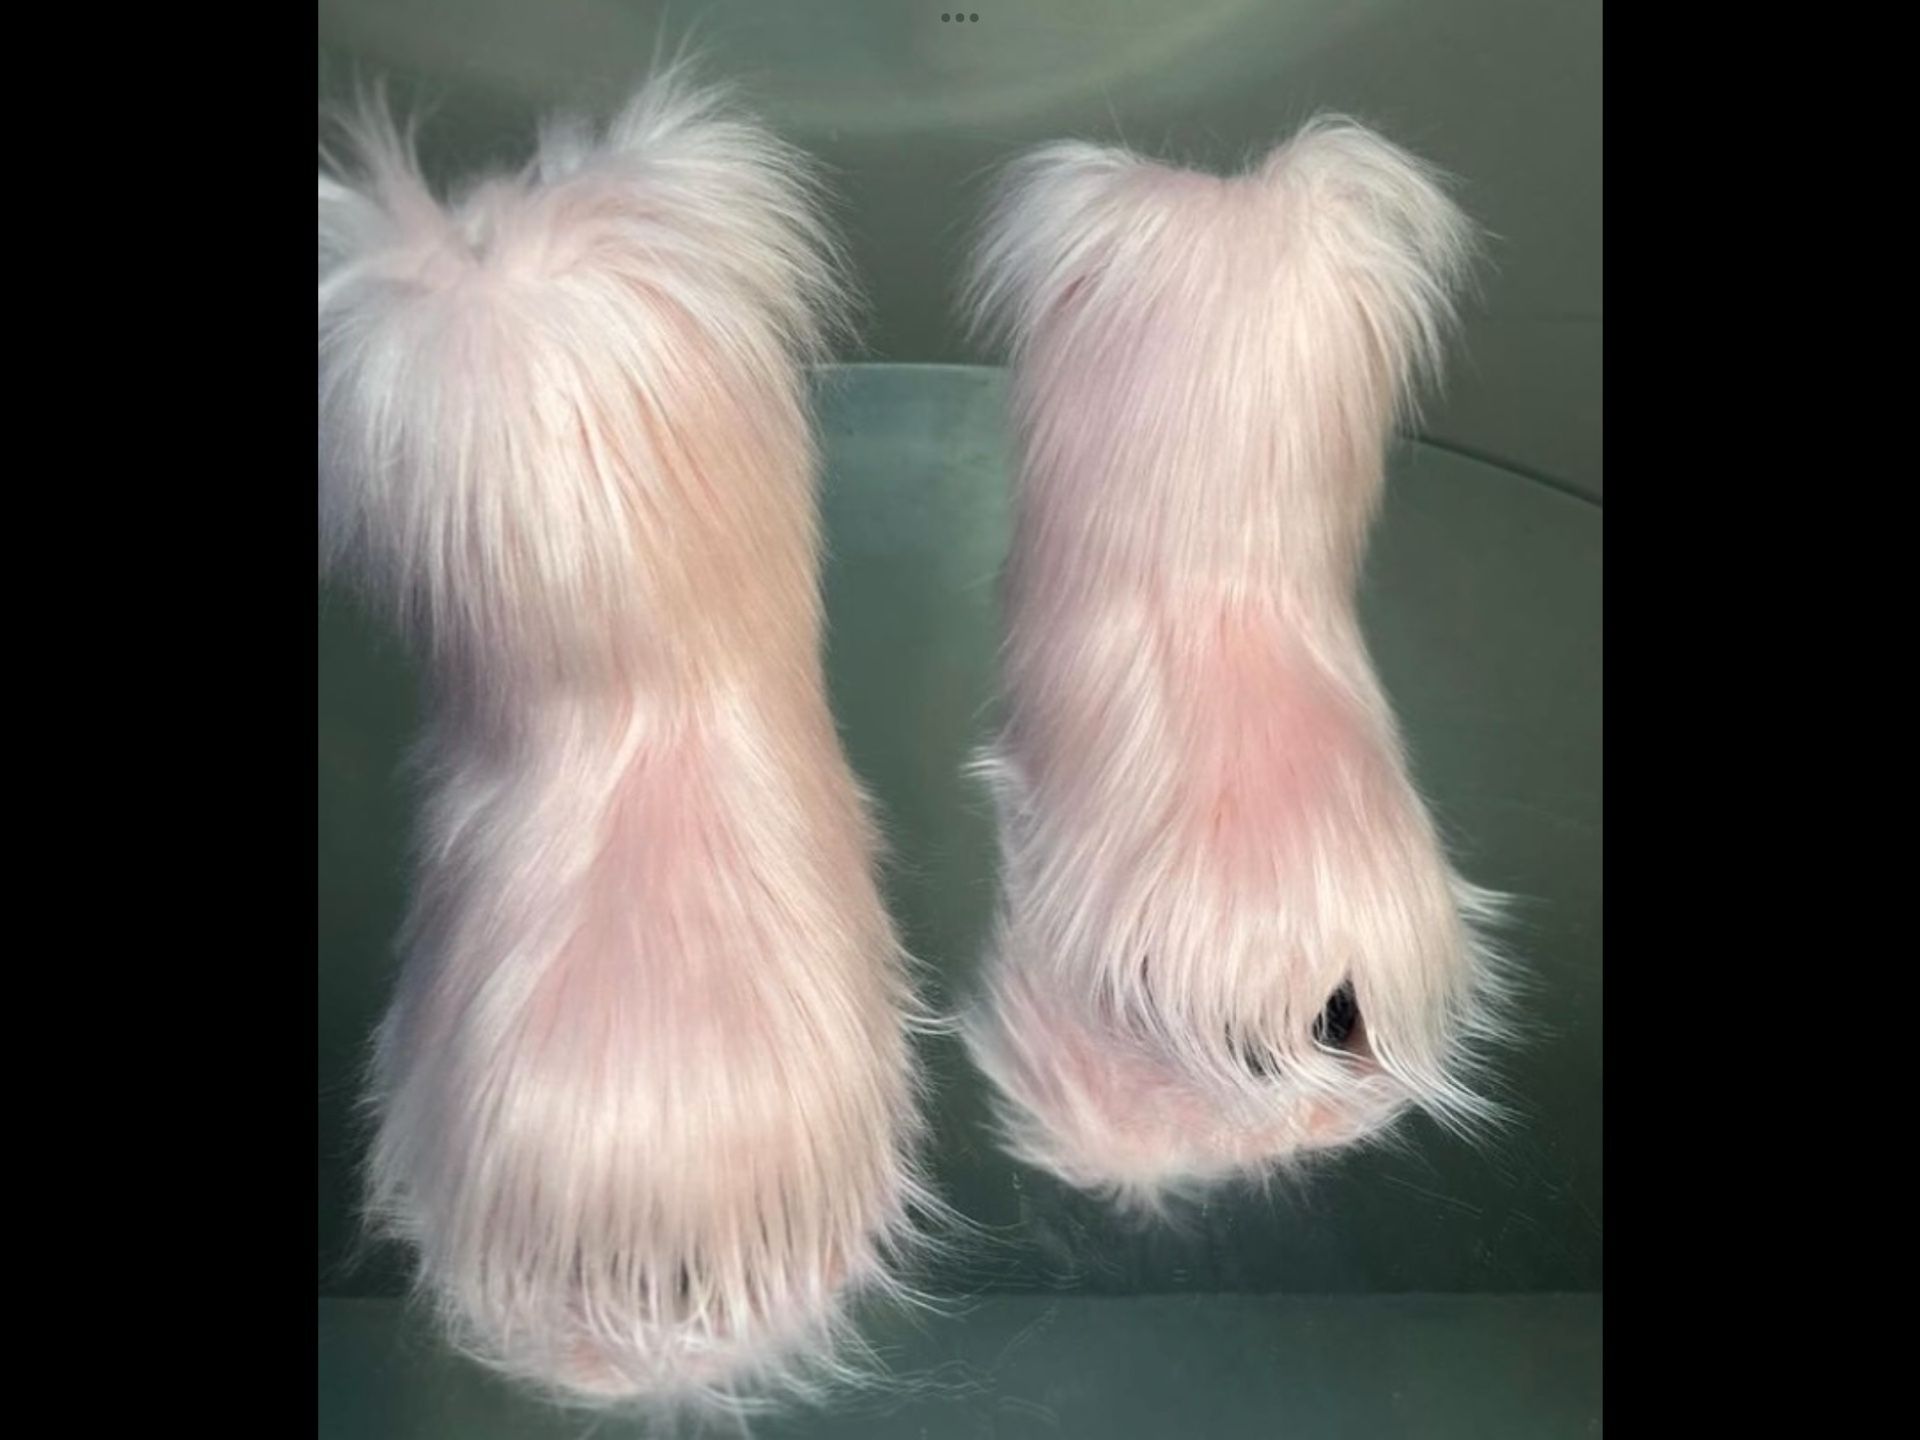 Pink Fur Boots Sizes 7-11